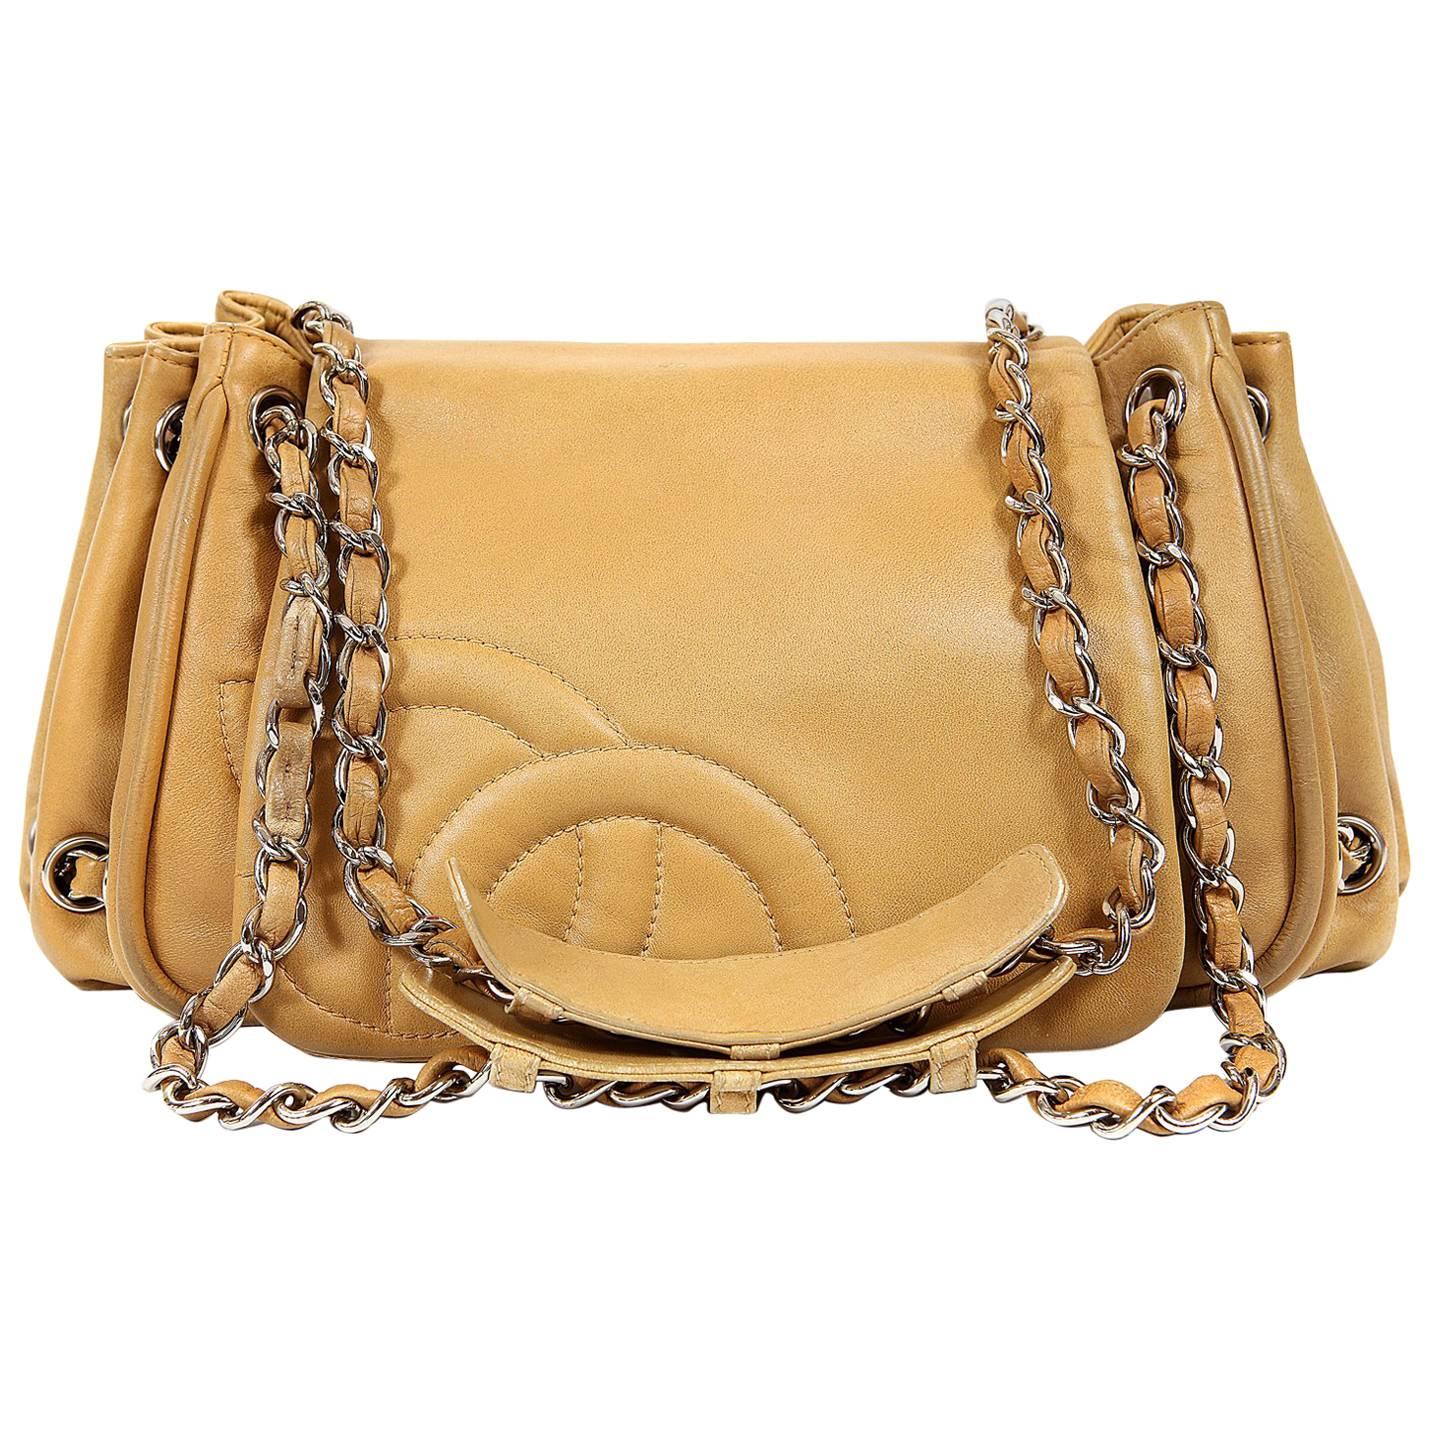 Chanel Beige Leather Accordion Flap Bag For Sale